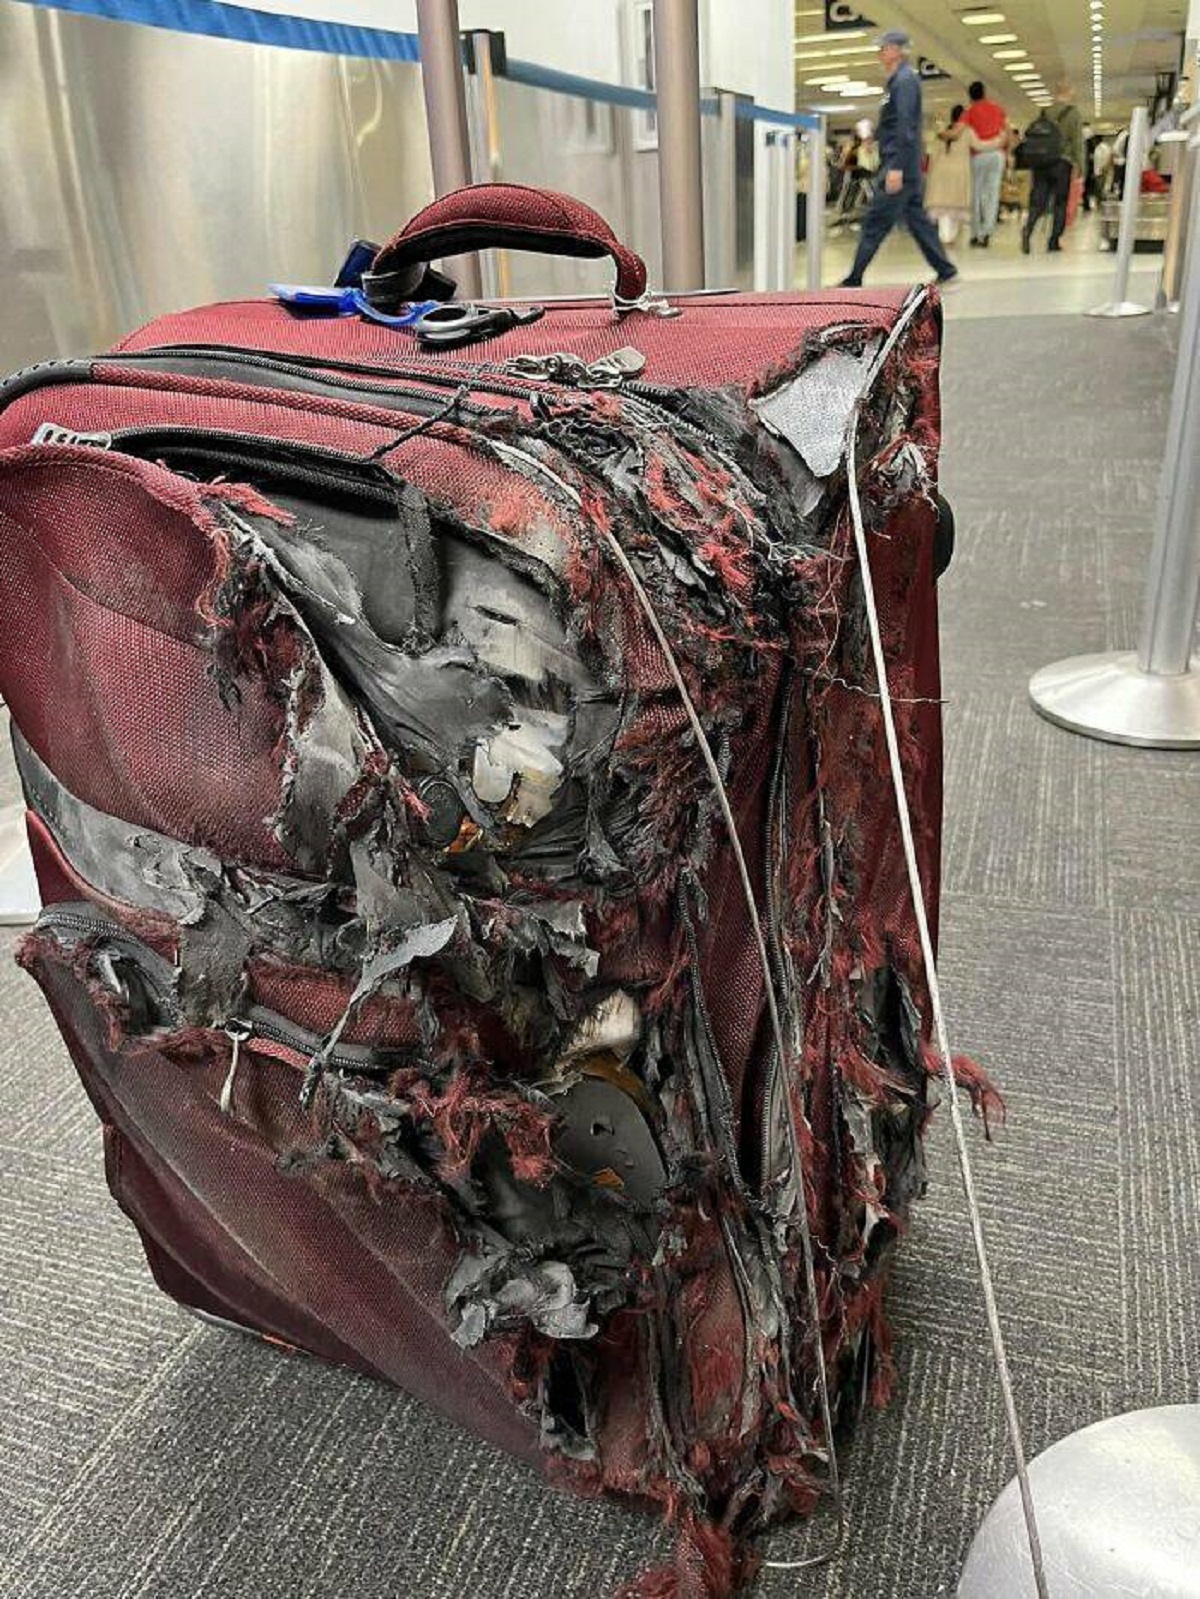 "My Uncle's Suitcase After His Flight"